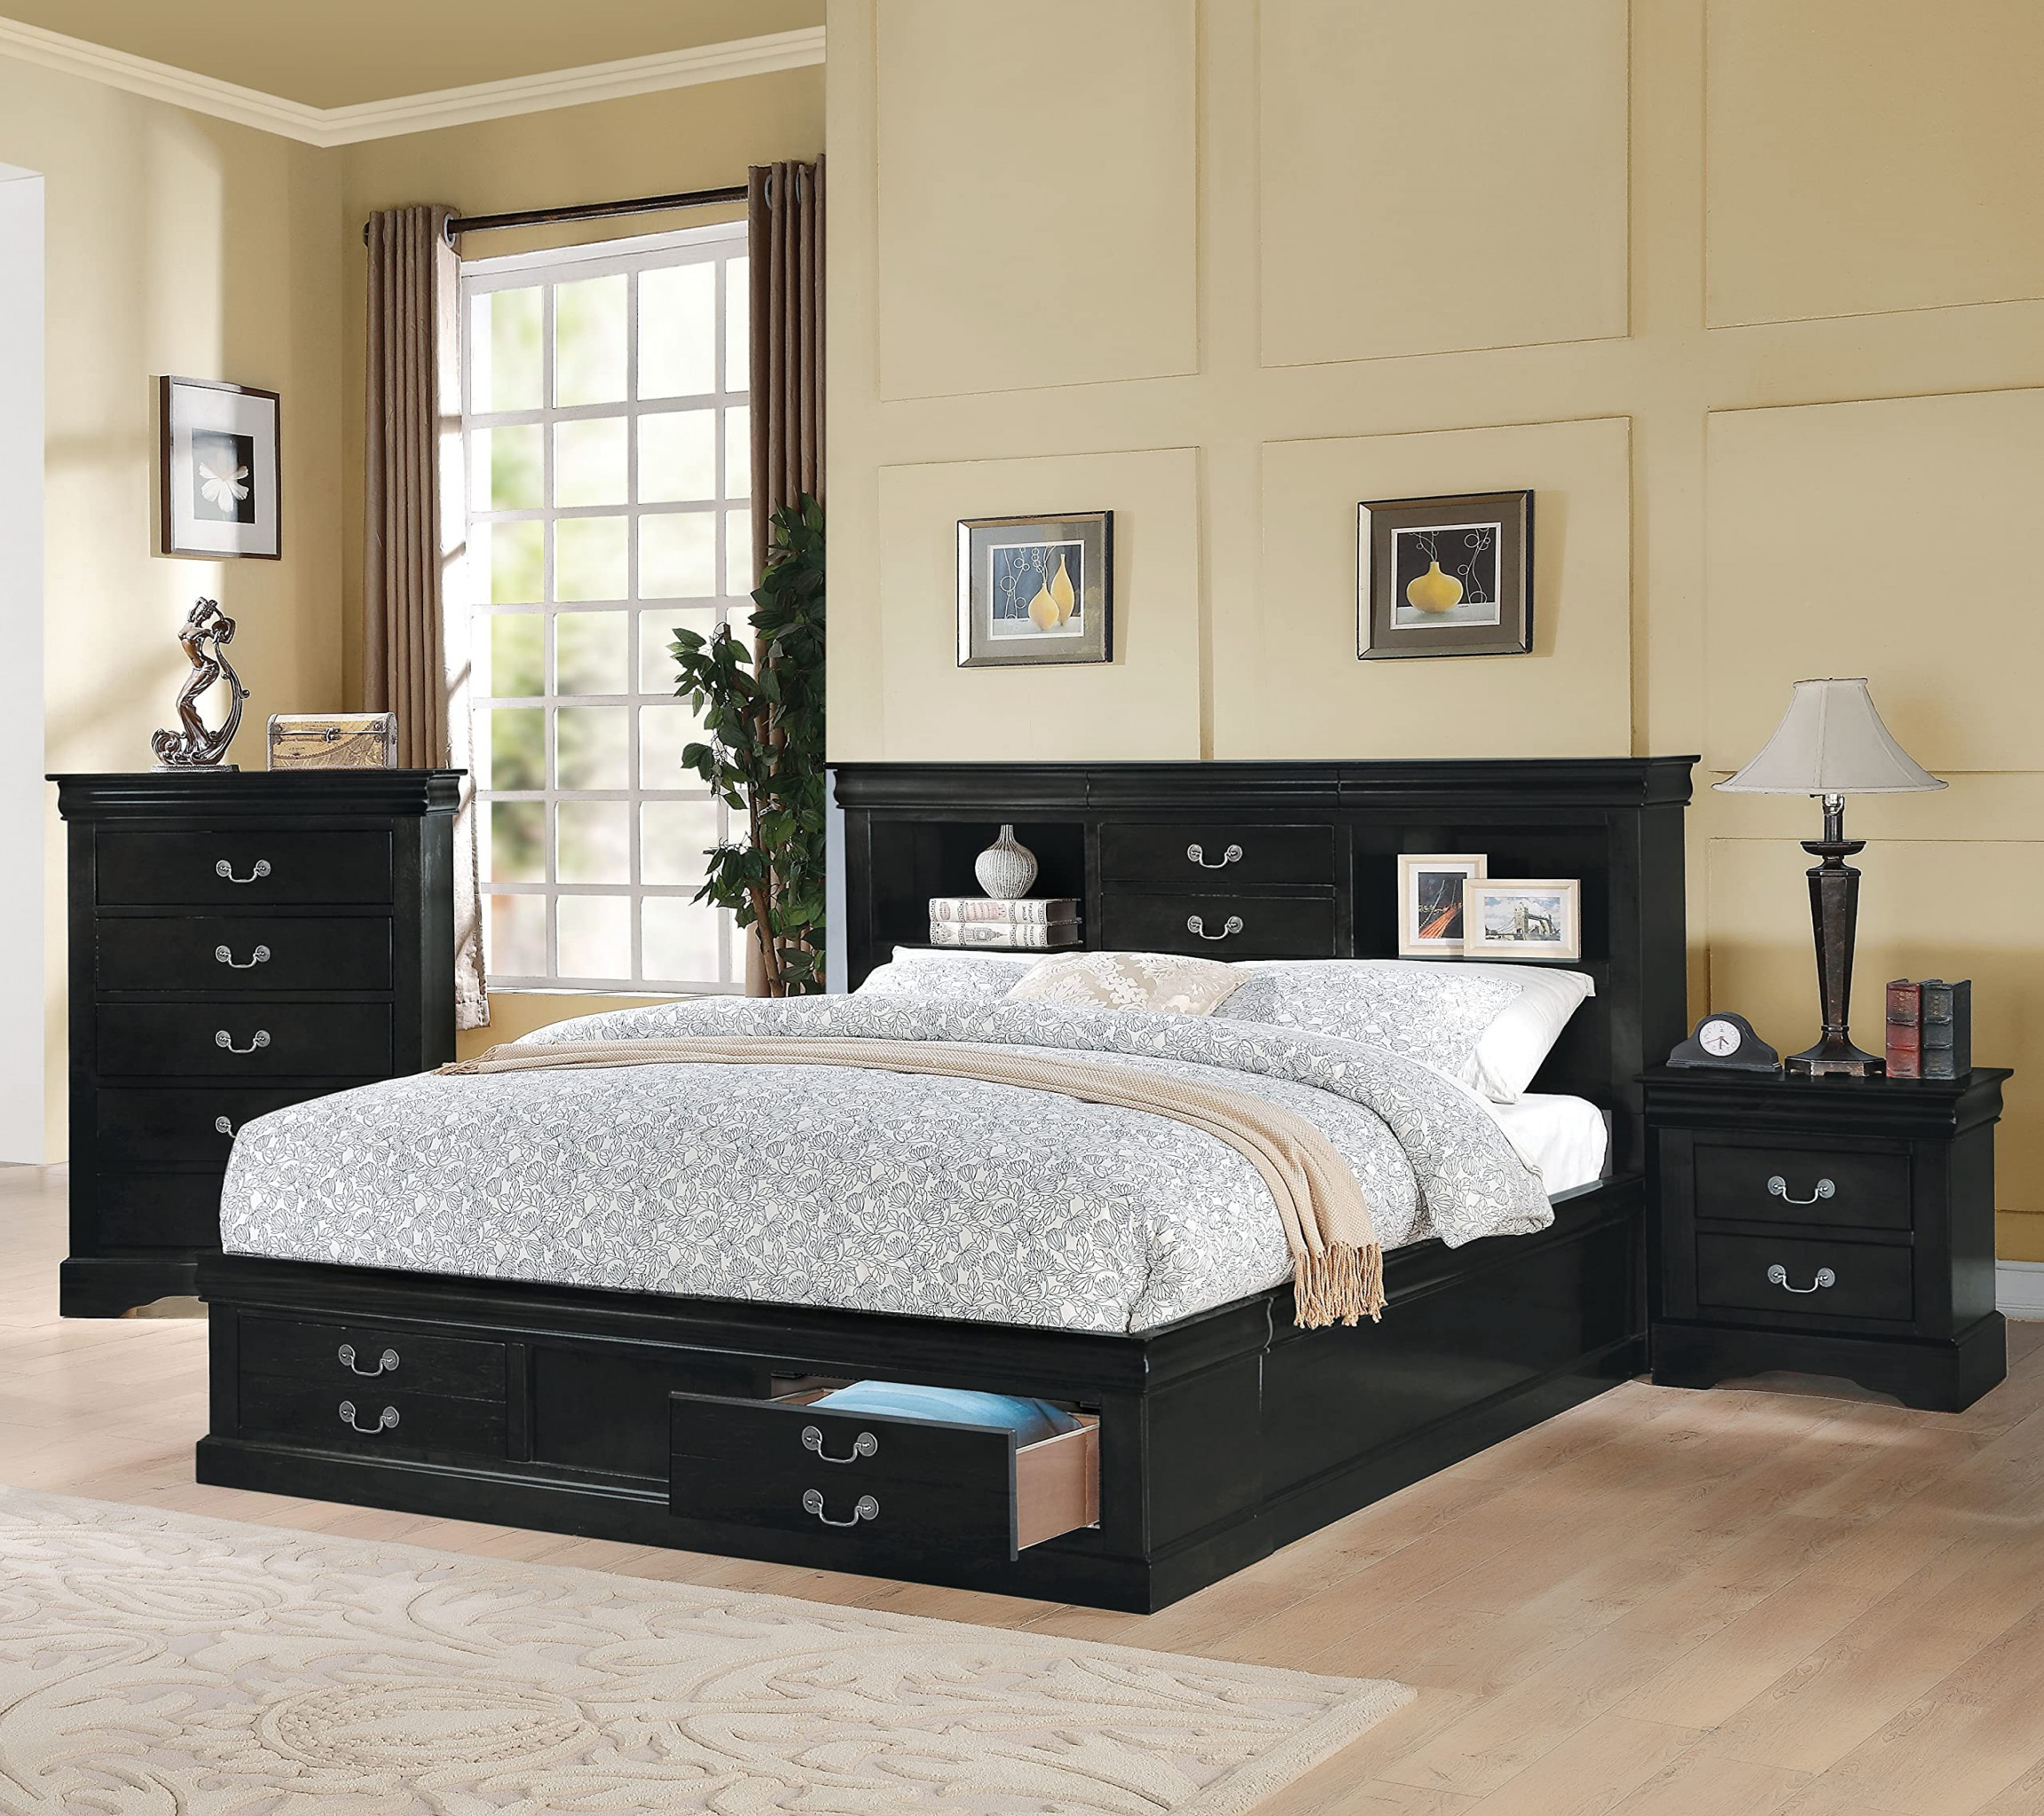 Queen Bed With Drawer